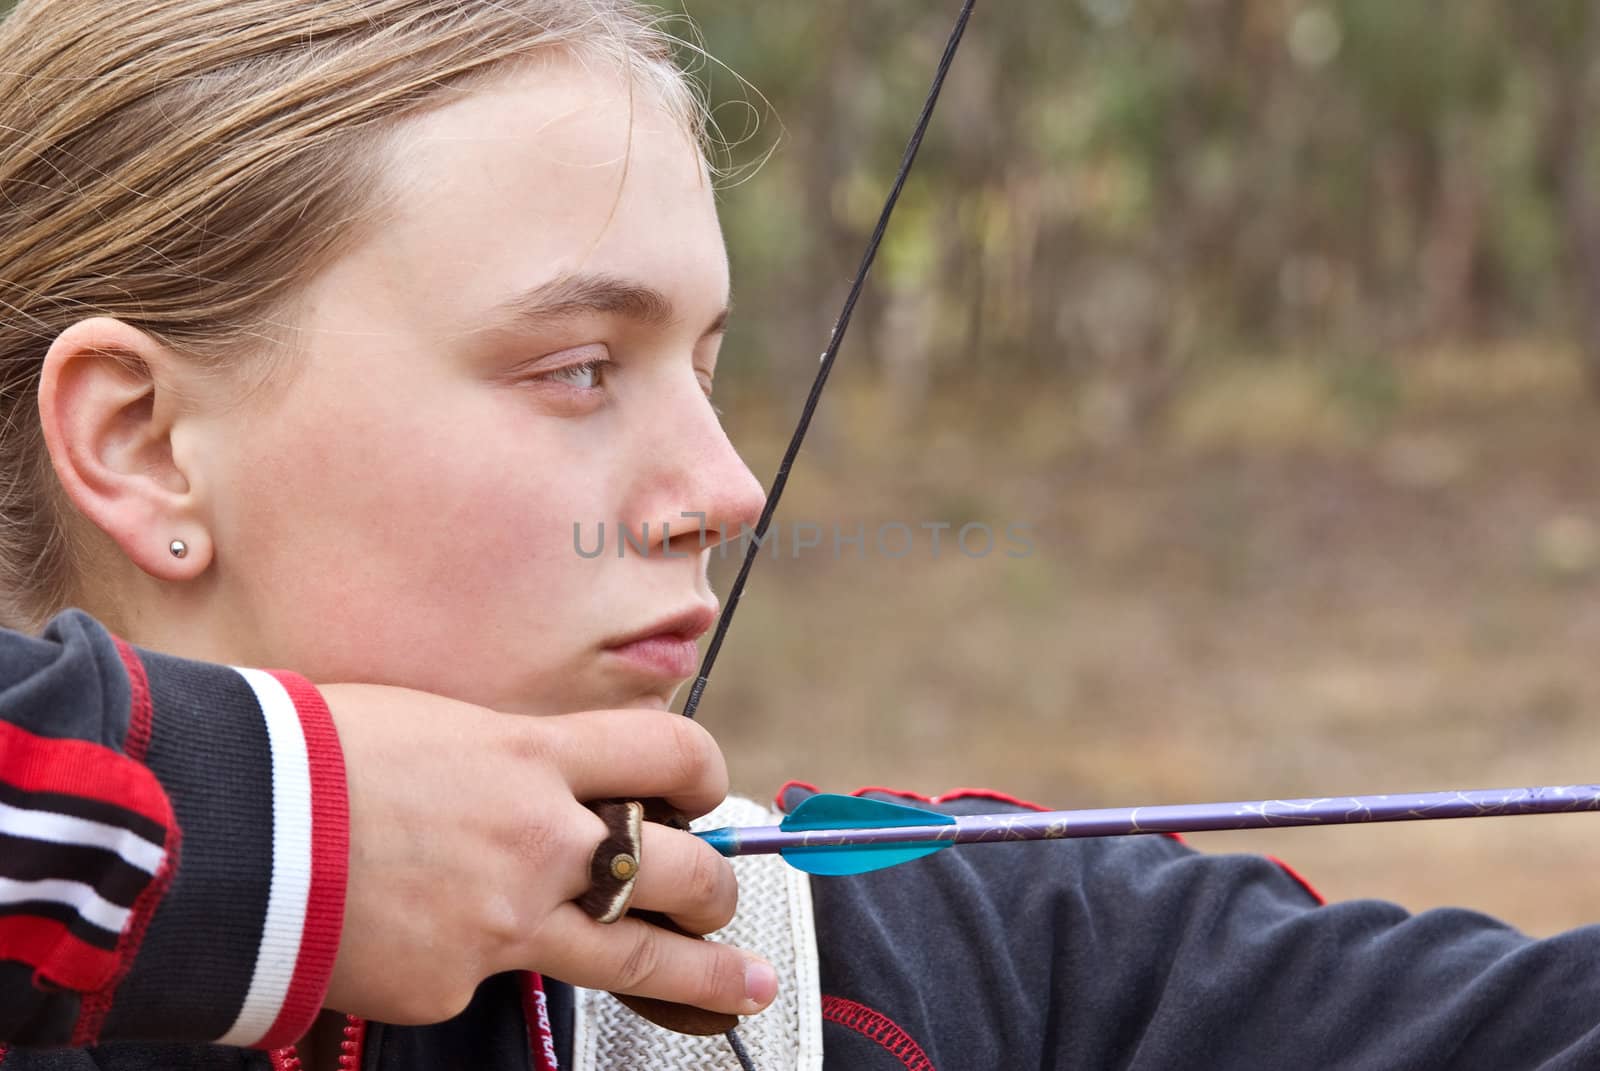 teenage girl doing archery by clearviewstock